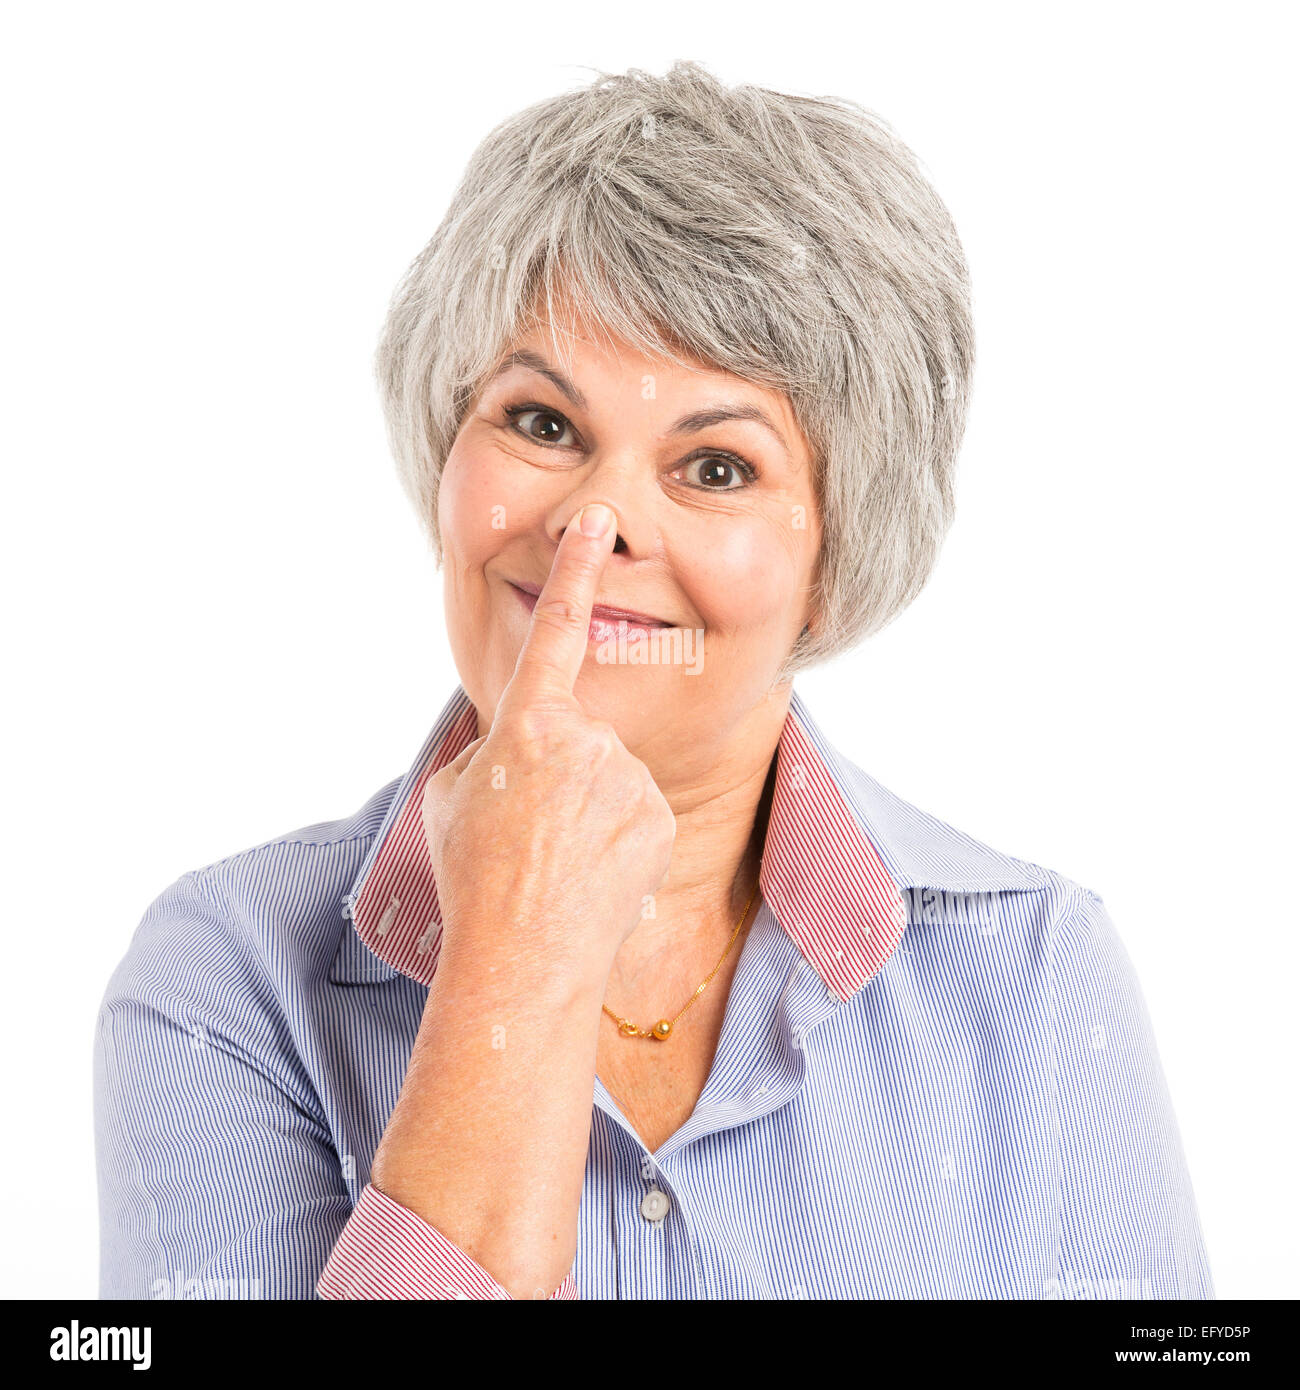 Portrait of a elderly woman making a funny face Stock Photo